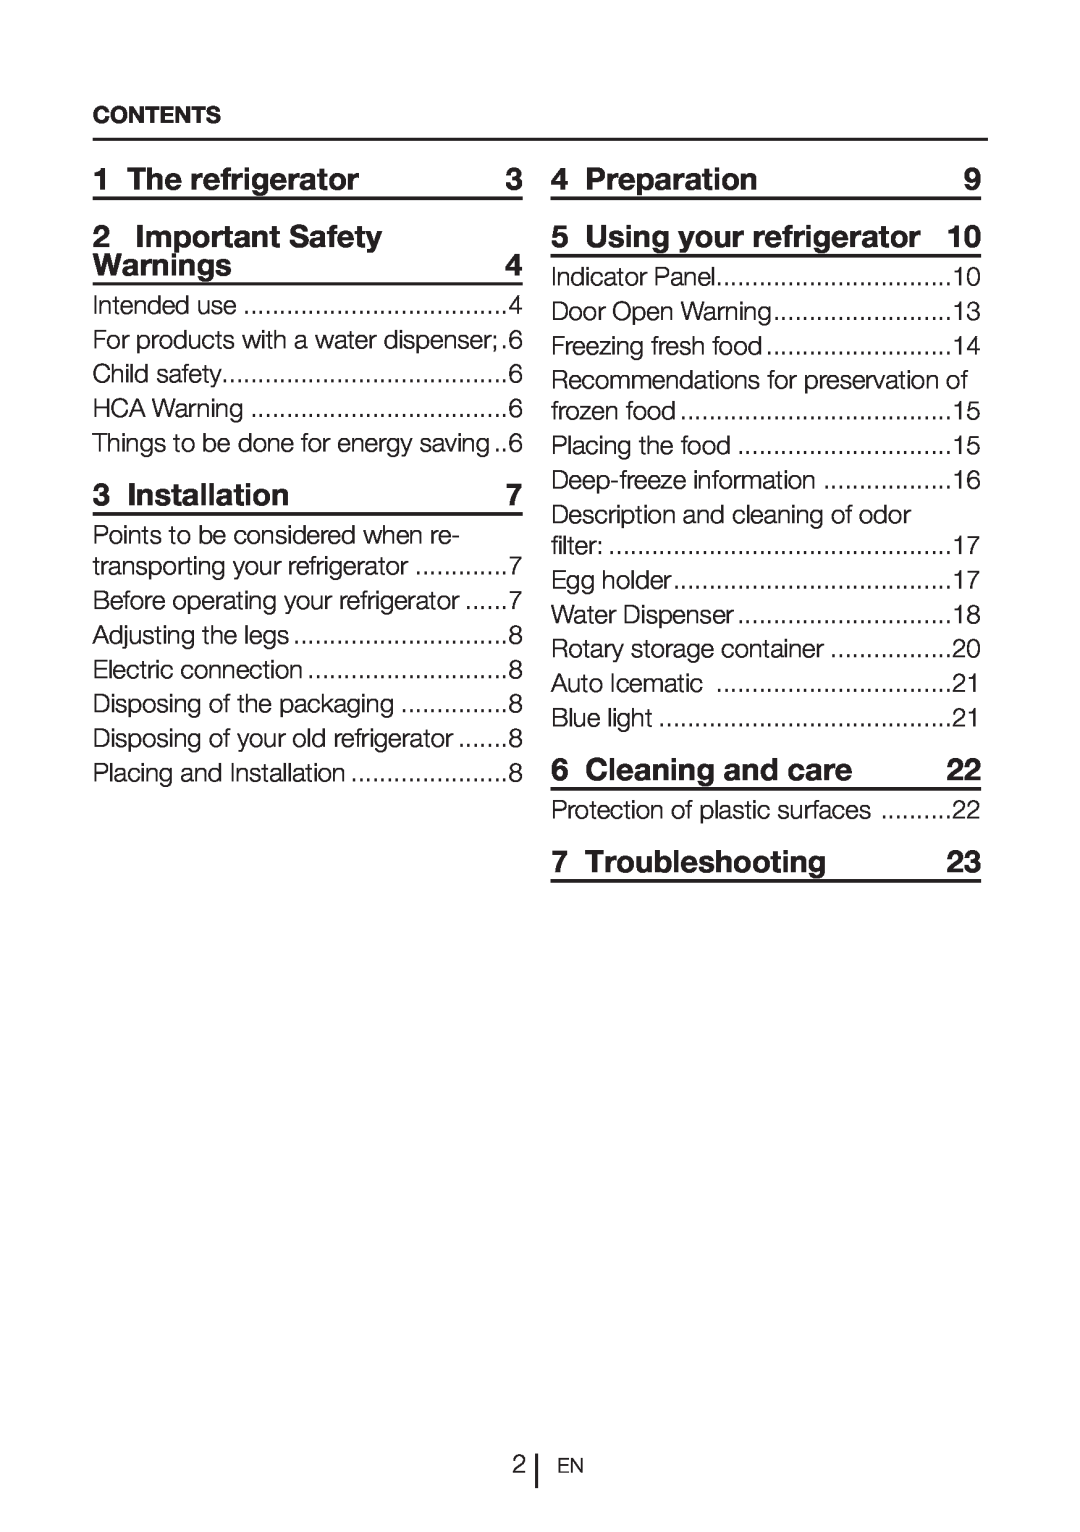 Blomberg DND 9977 PD The refrigerator, Important Safety, Warnings, Installation, Preparation, Using your refrigerator 